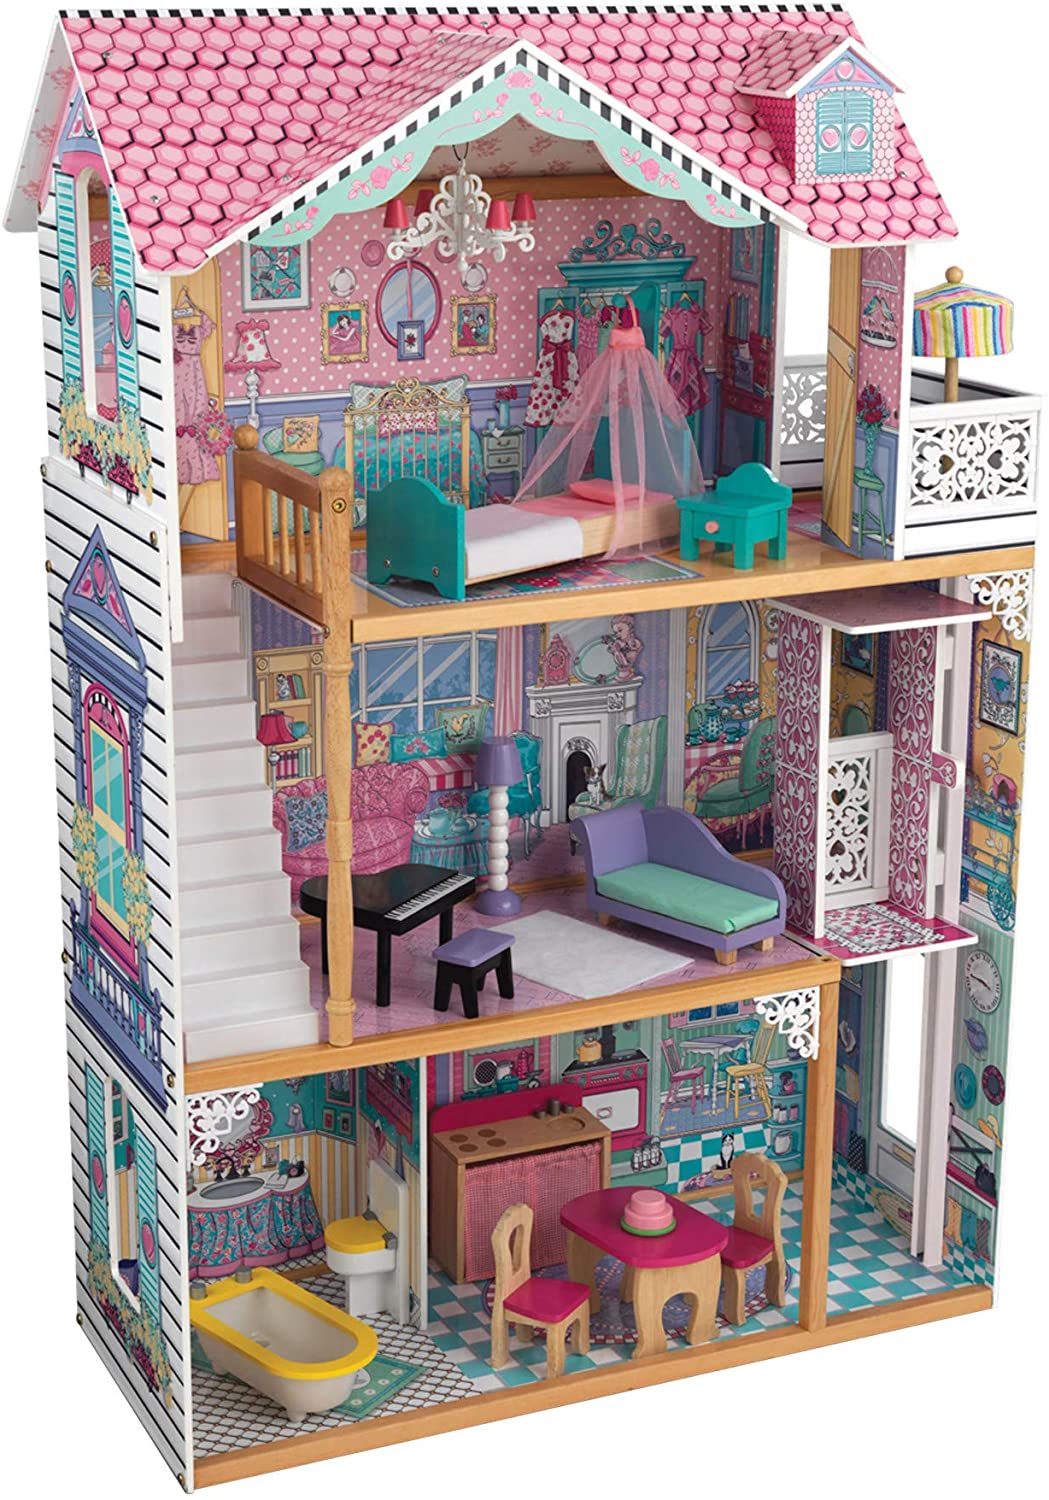 Kid Kraft Annabelle Doll House: Dollhouse is a classic three-story victorian house with wide windows on either side for easy viewing of the interior - 65079